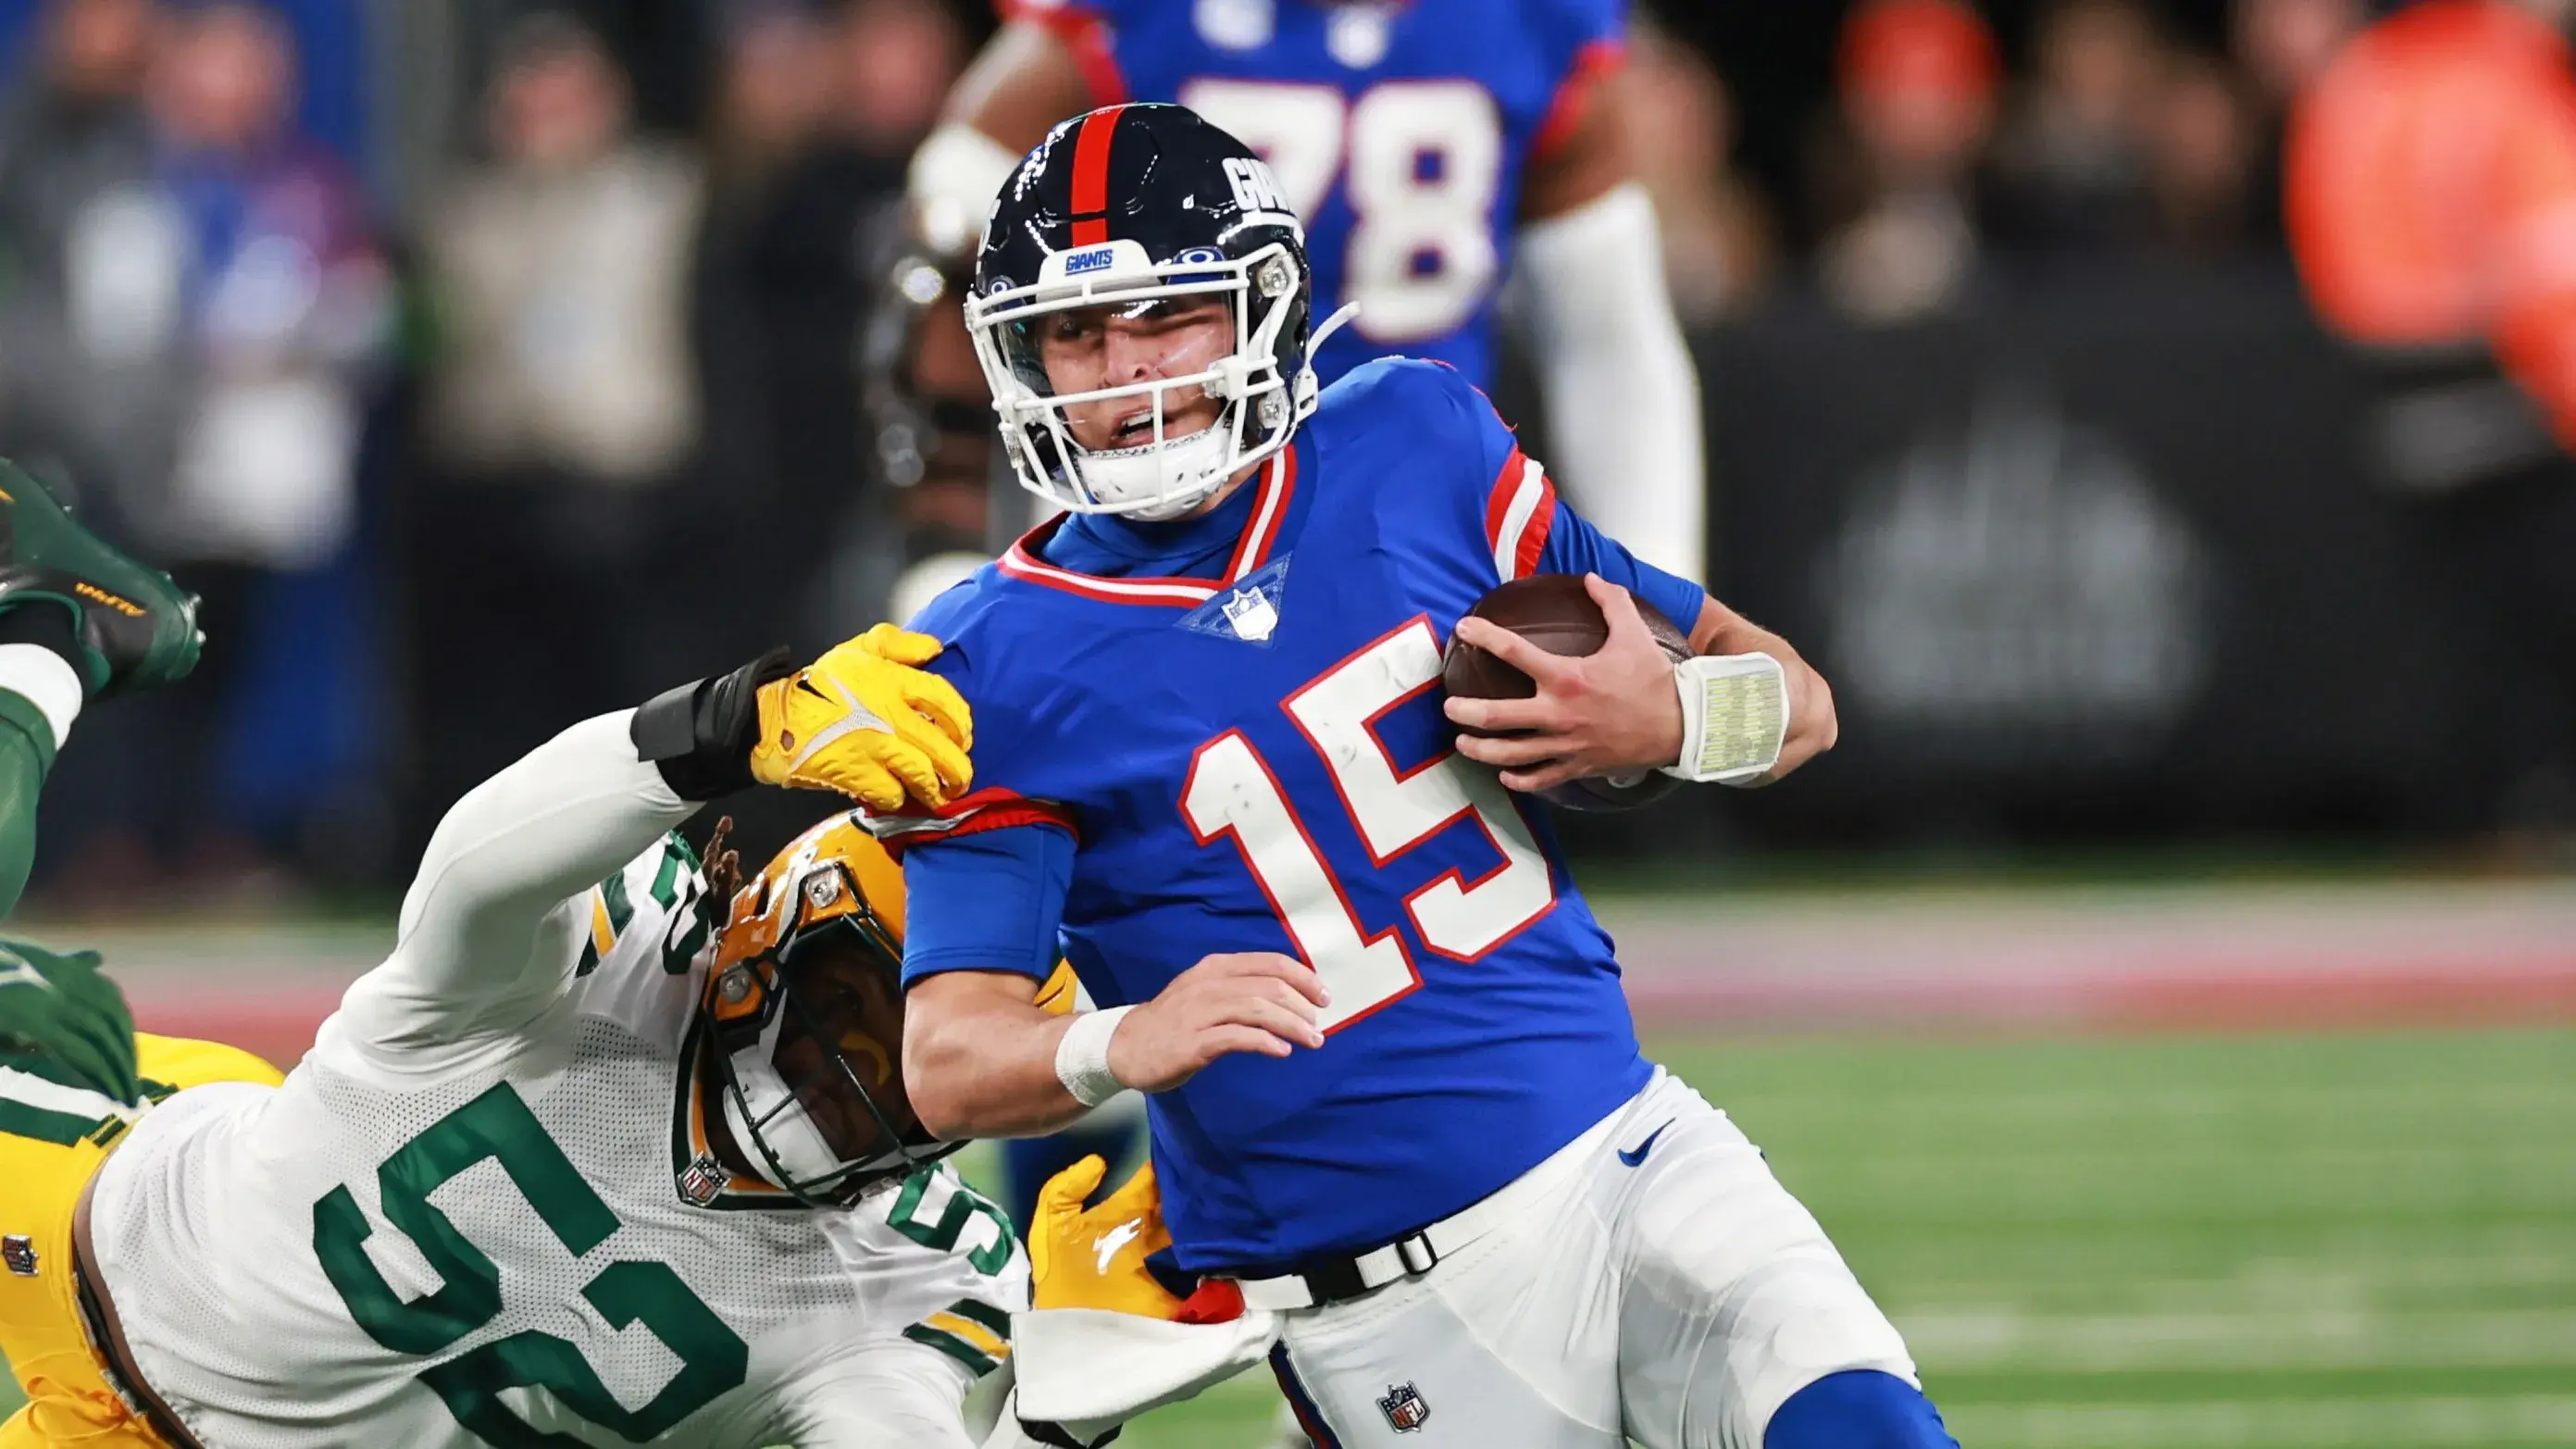 Dec 11, 2023; East Rutherford, New Jersey, USA; New York Giants quarterback Tommy DeVito (15) is tackled by Green Bay Packers linebacker Rashan Gary (52) during the second quarter at MetLife Stadium. Mandatory Credit: Vincent Carchietta-USA TODAY Sports / © Vincent Carchietta-USA TODAY Sports